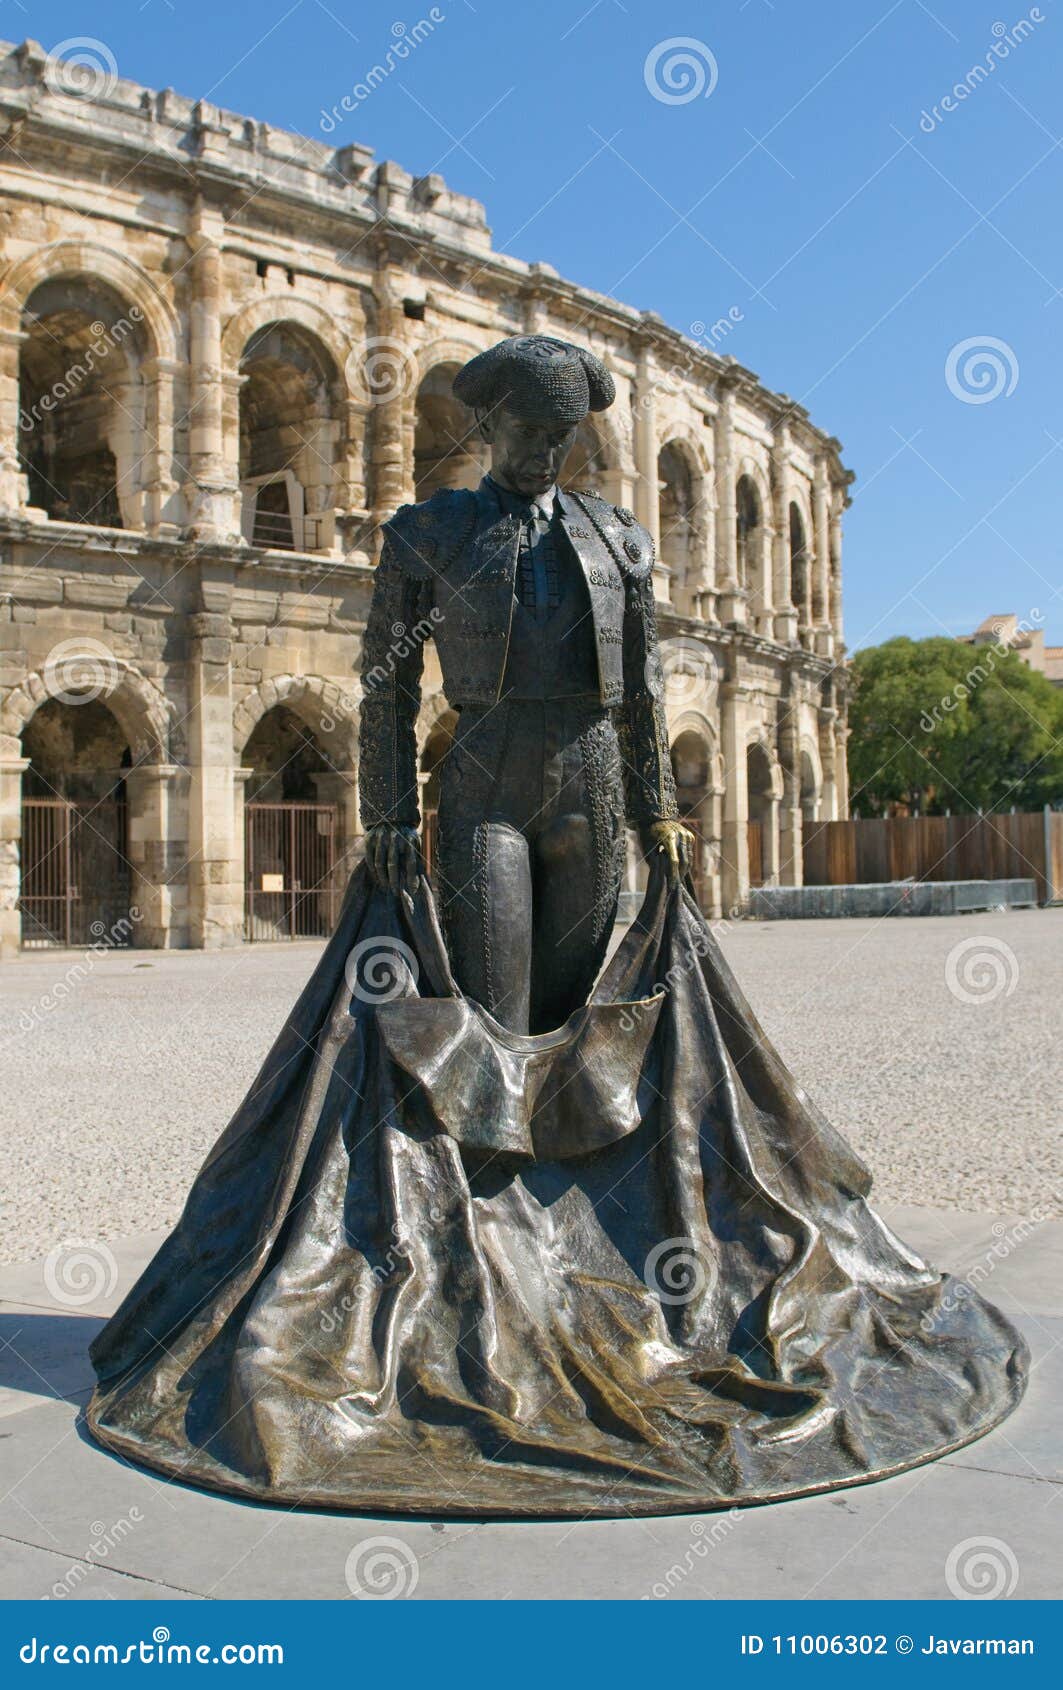 monumetnt of matador in front of arenas of nimes